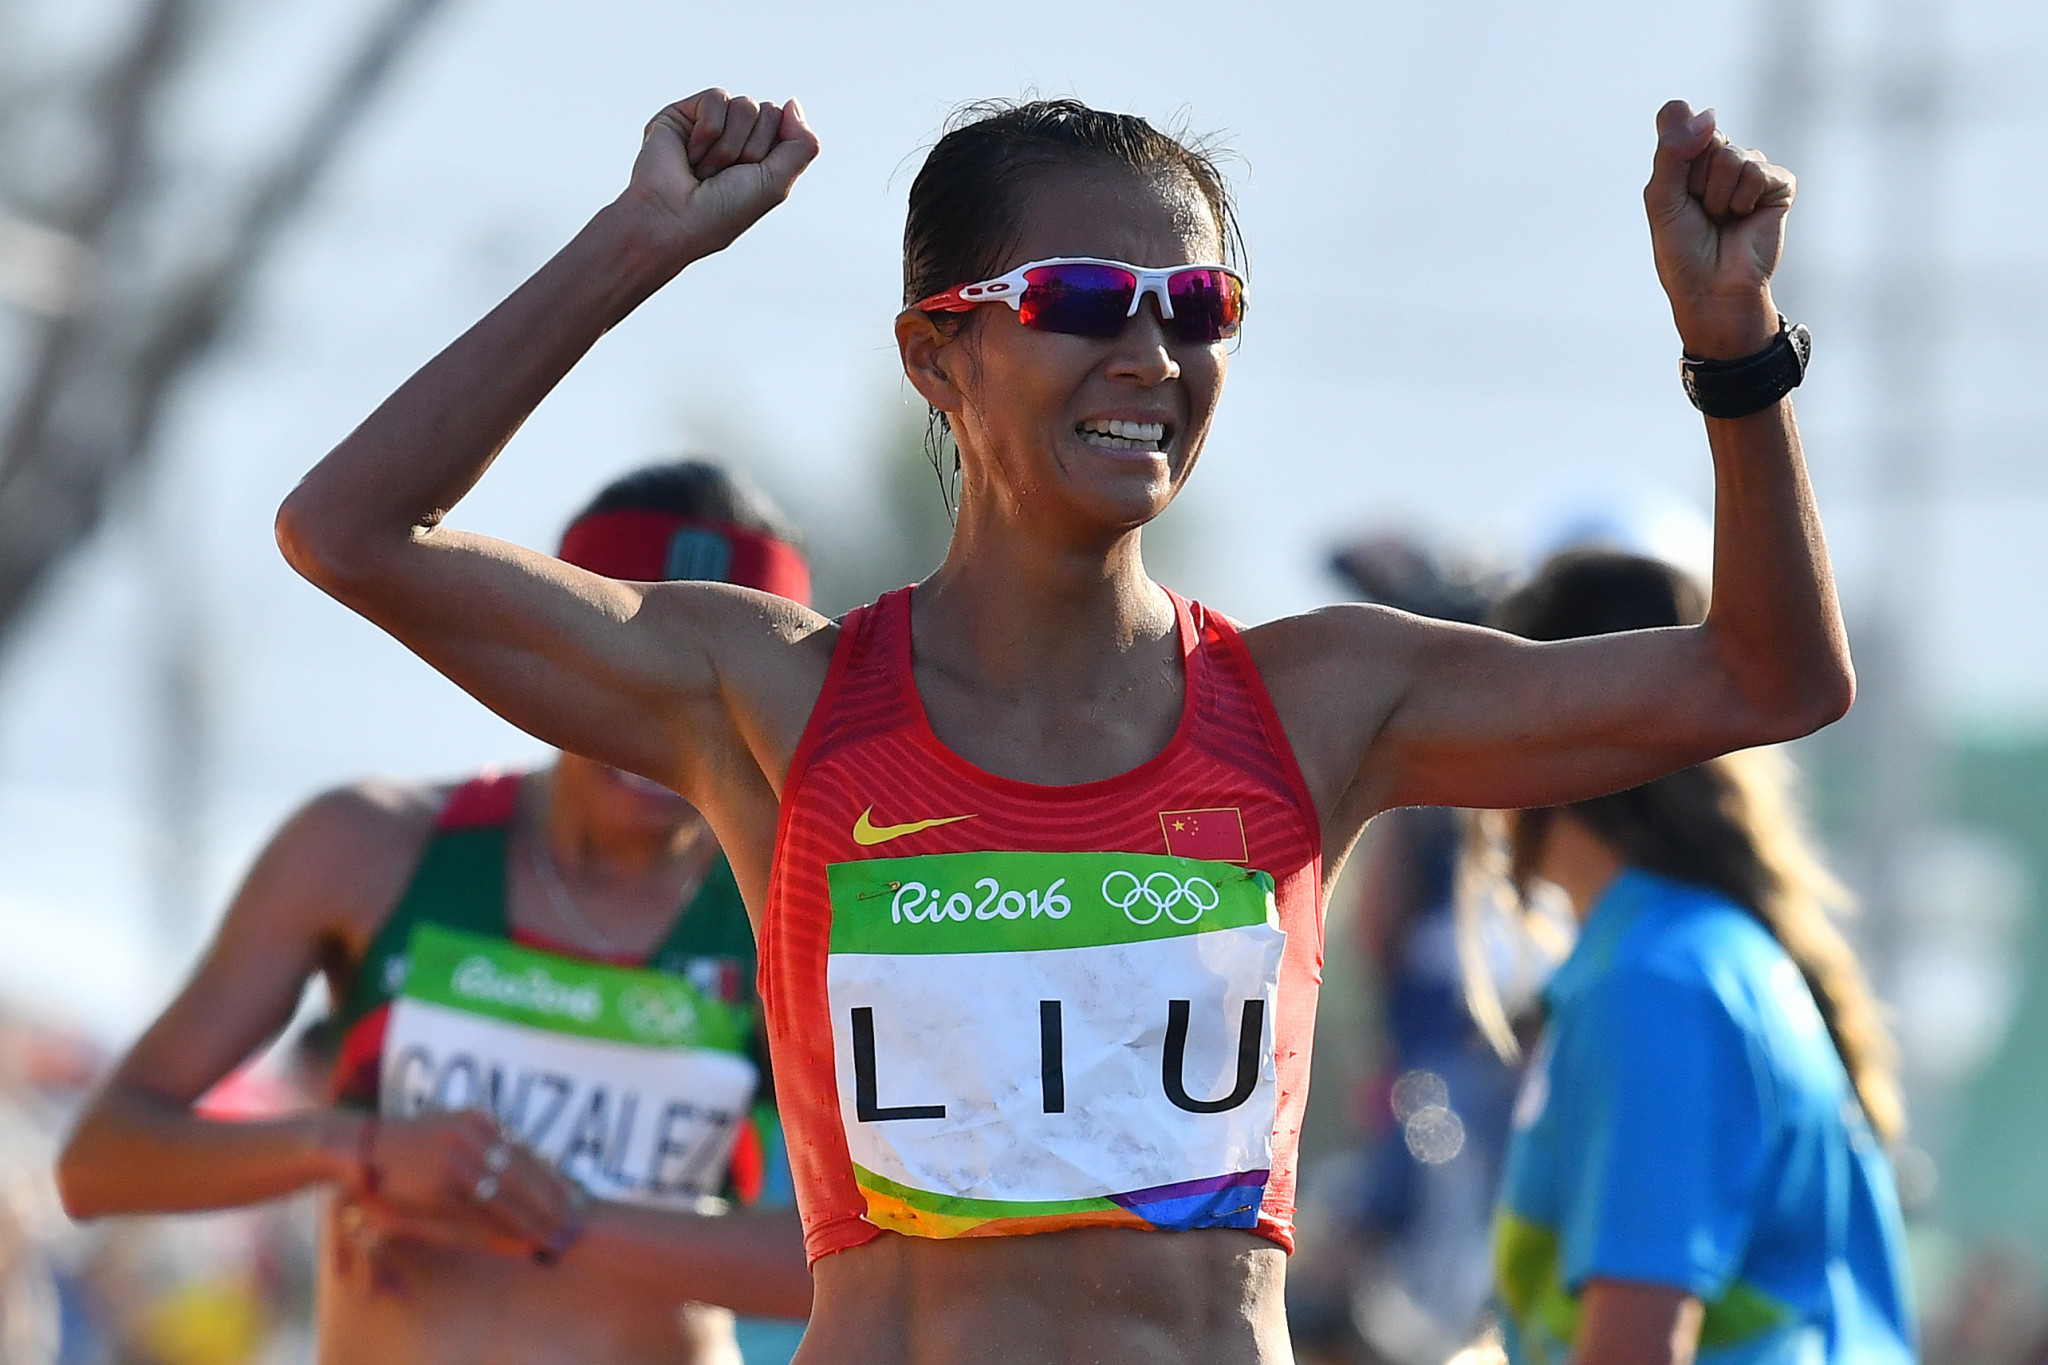 Chna's Rio 2016 champion Liu Hong needs a good result at tomorrow's IAAF Race Walking Challenge in Taicang to reach this year's World Championships in Doha ©Getty Images